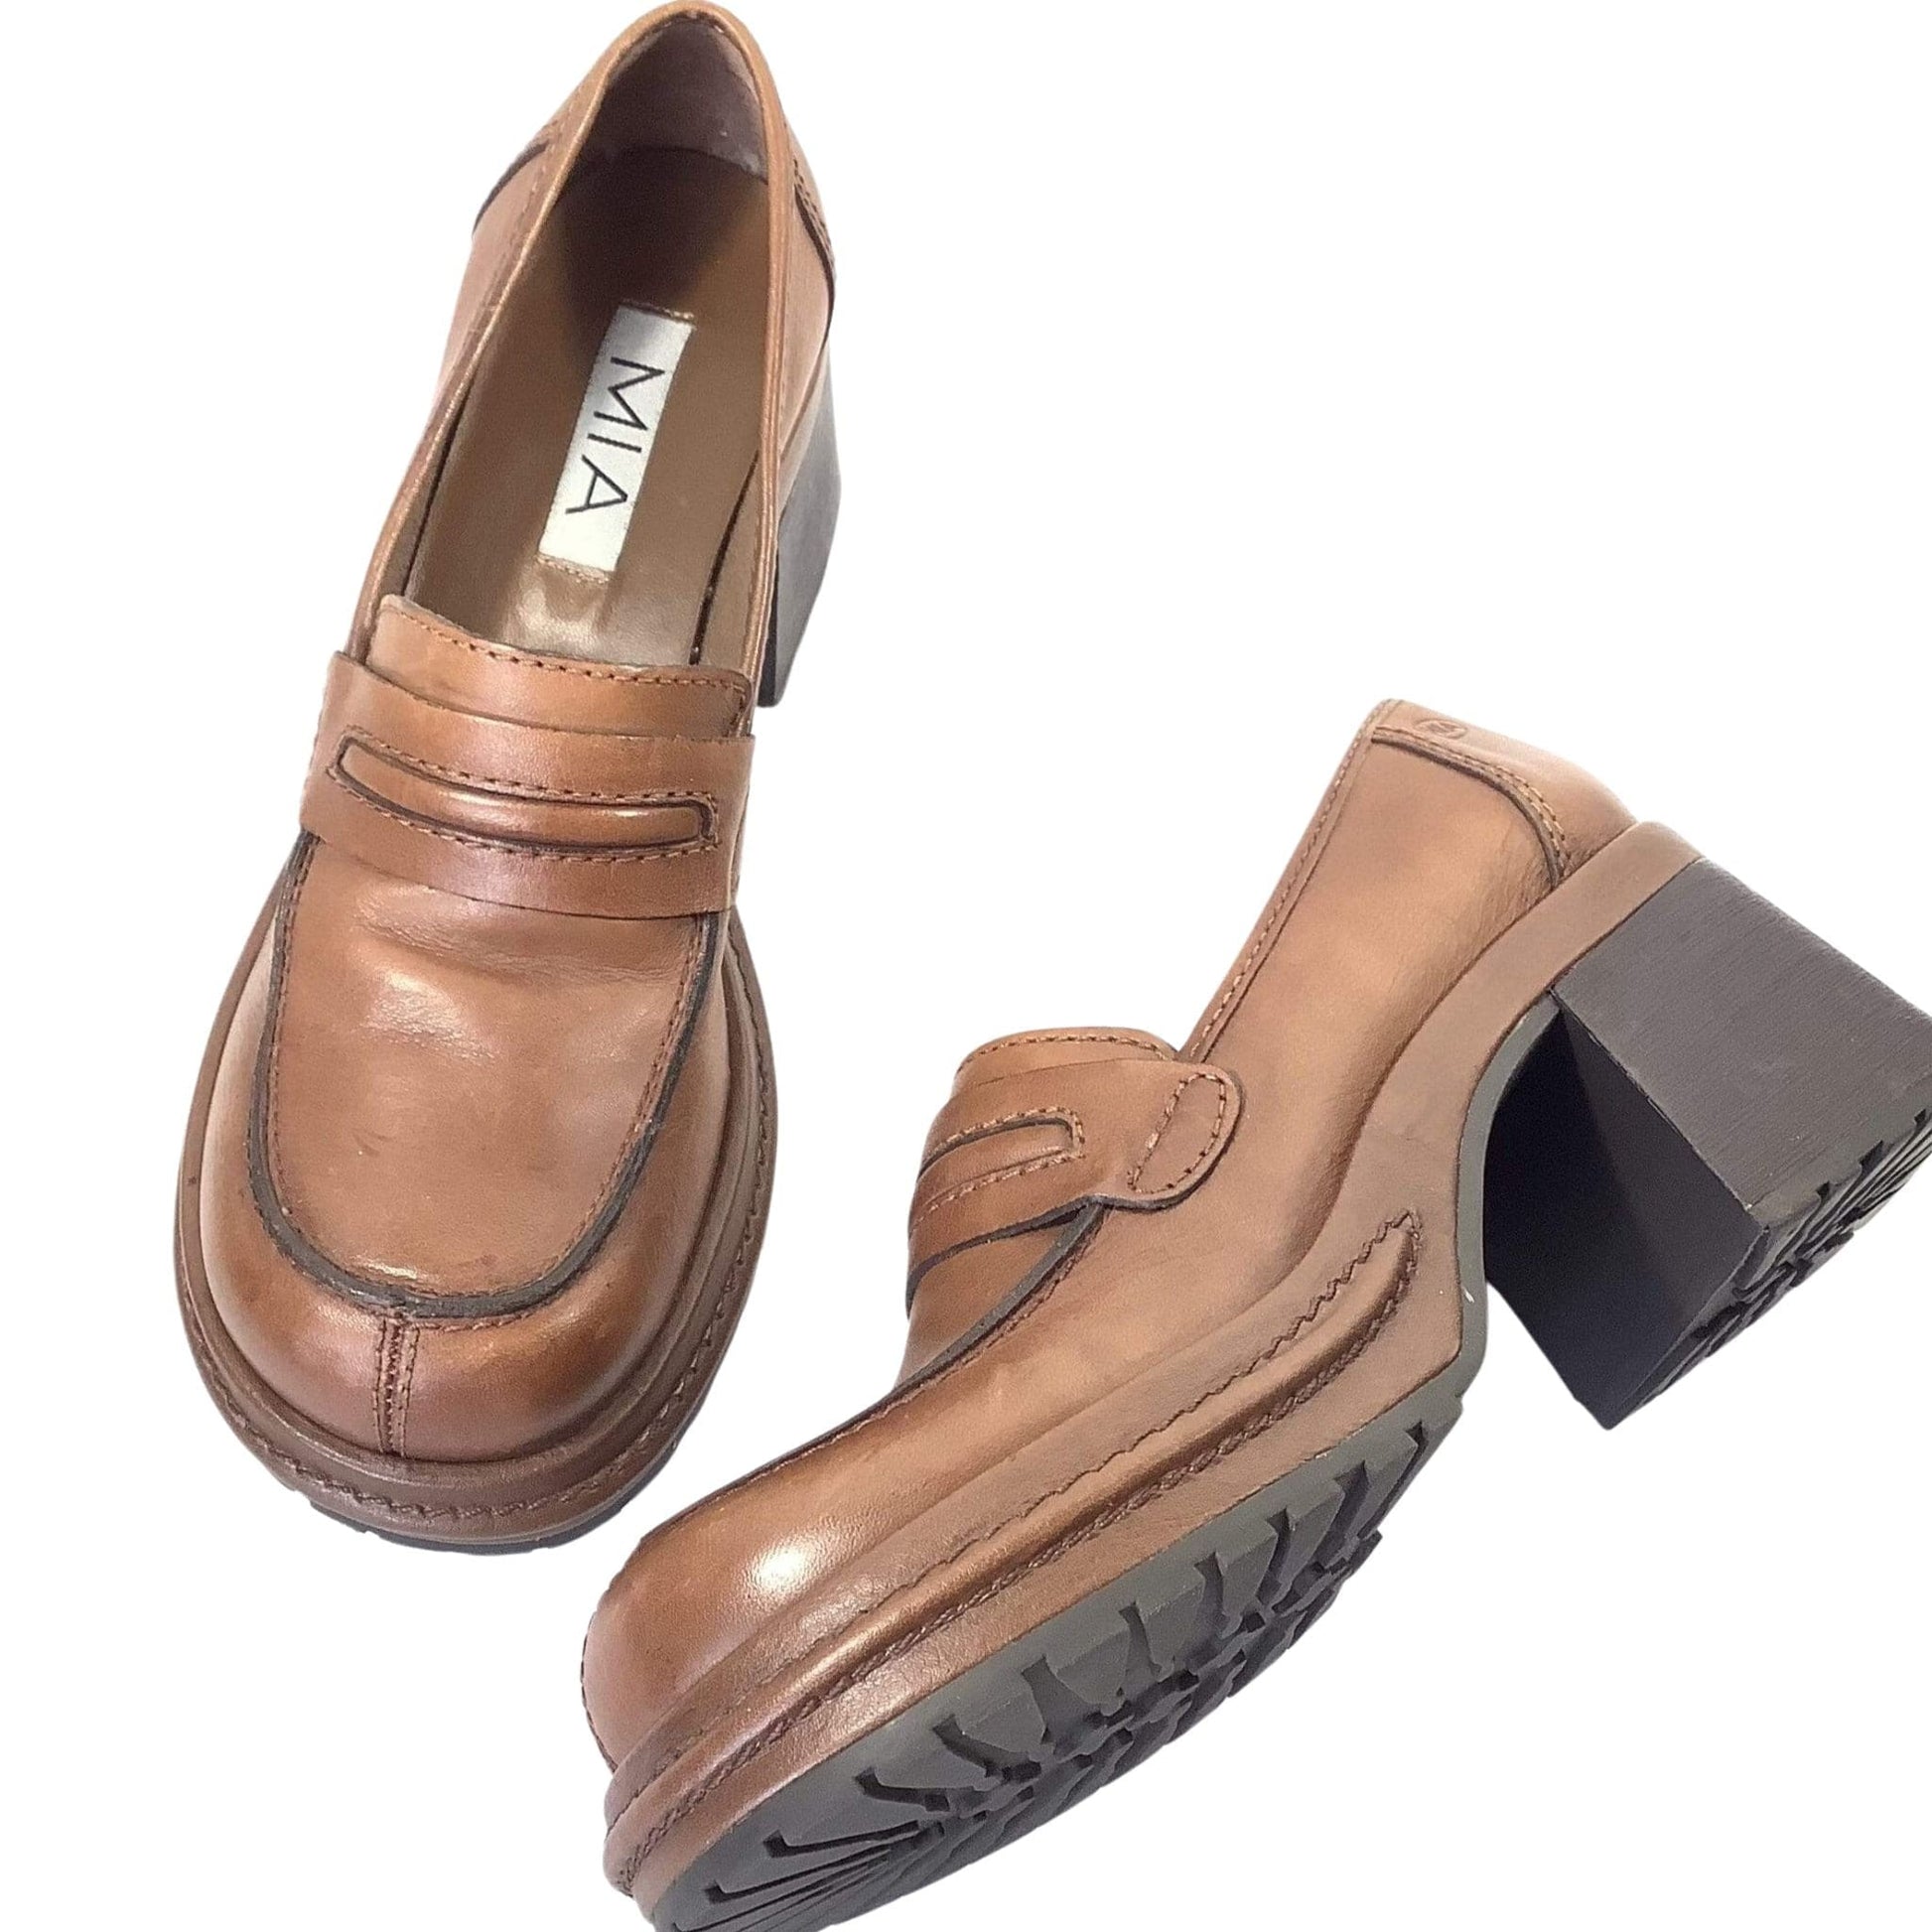 Chunky Mia Loafers 8 / Tan / Y2K - Now